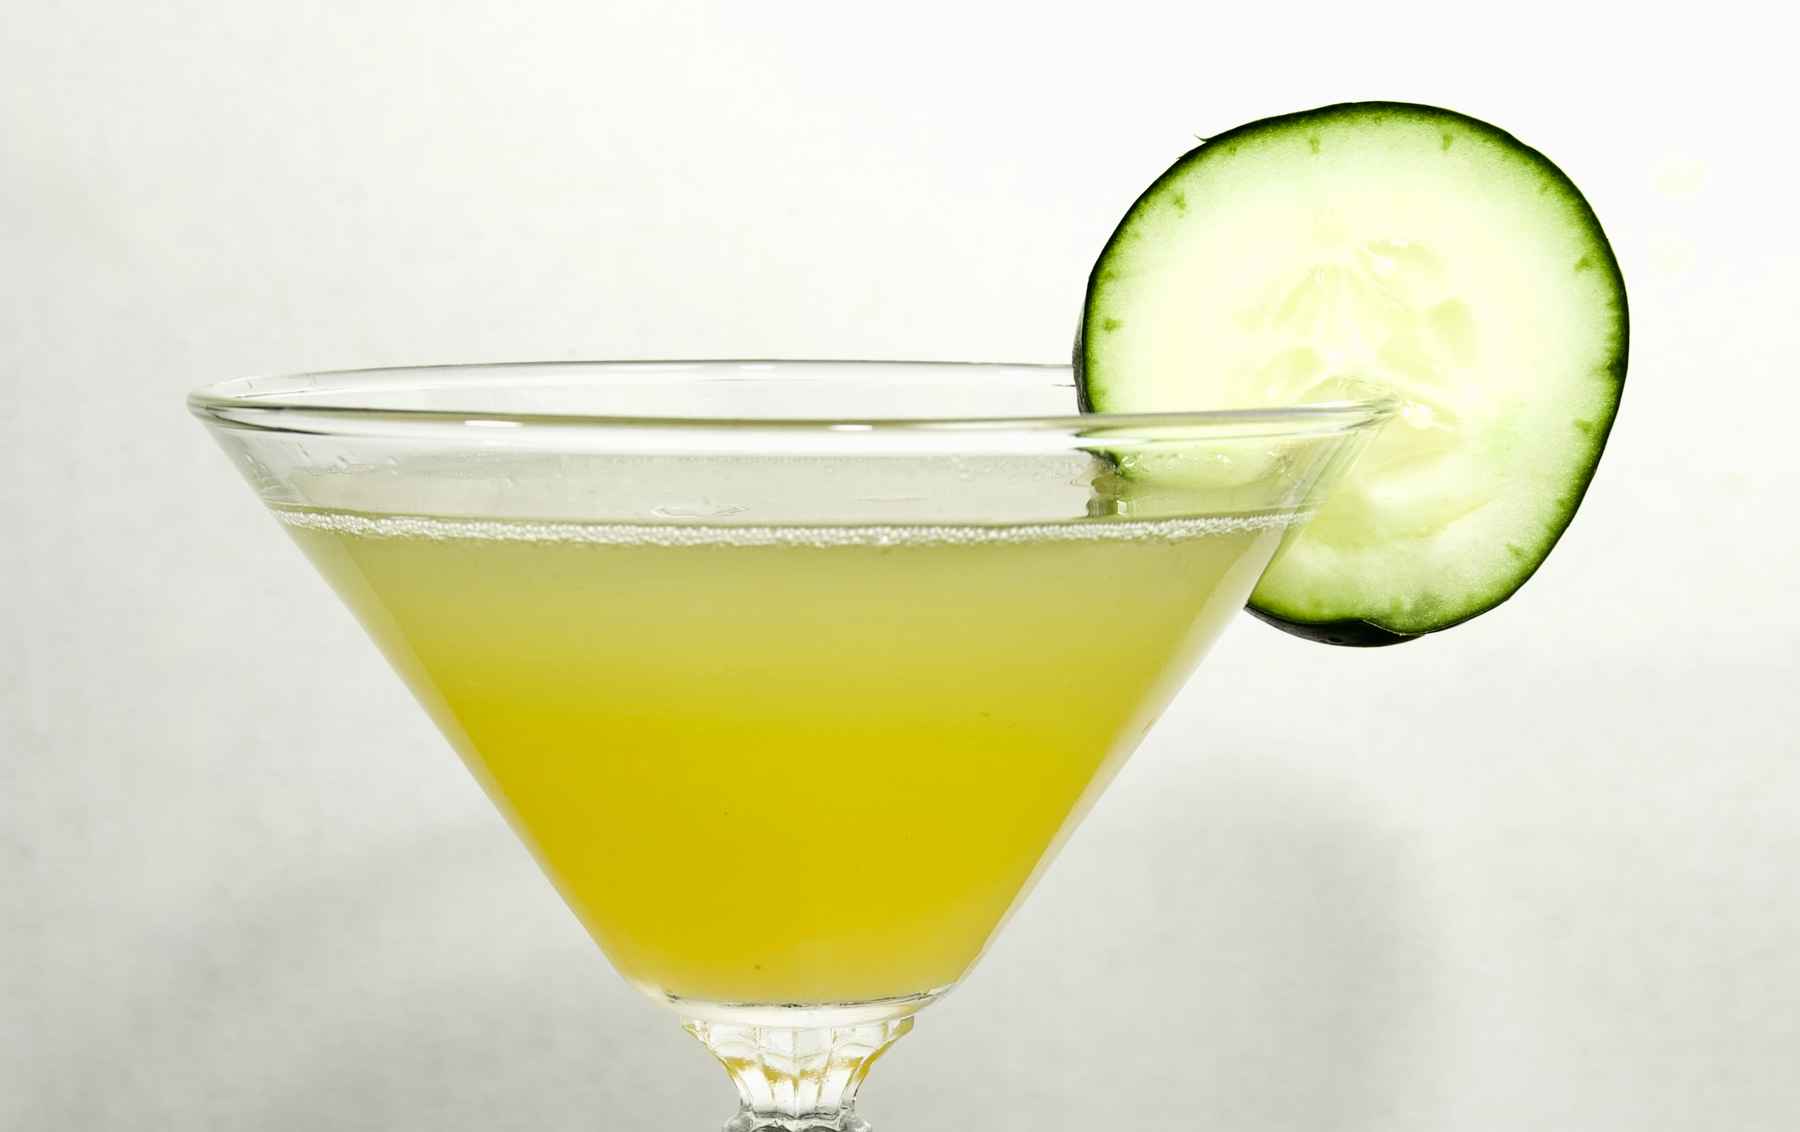 Cocktail in a martini dress garnished with a cucumber slice.